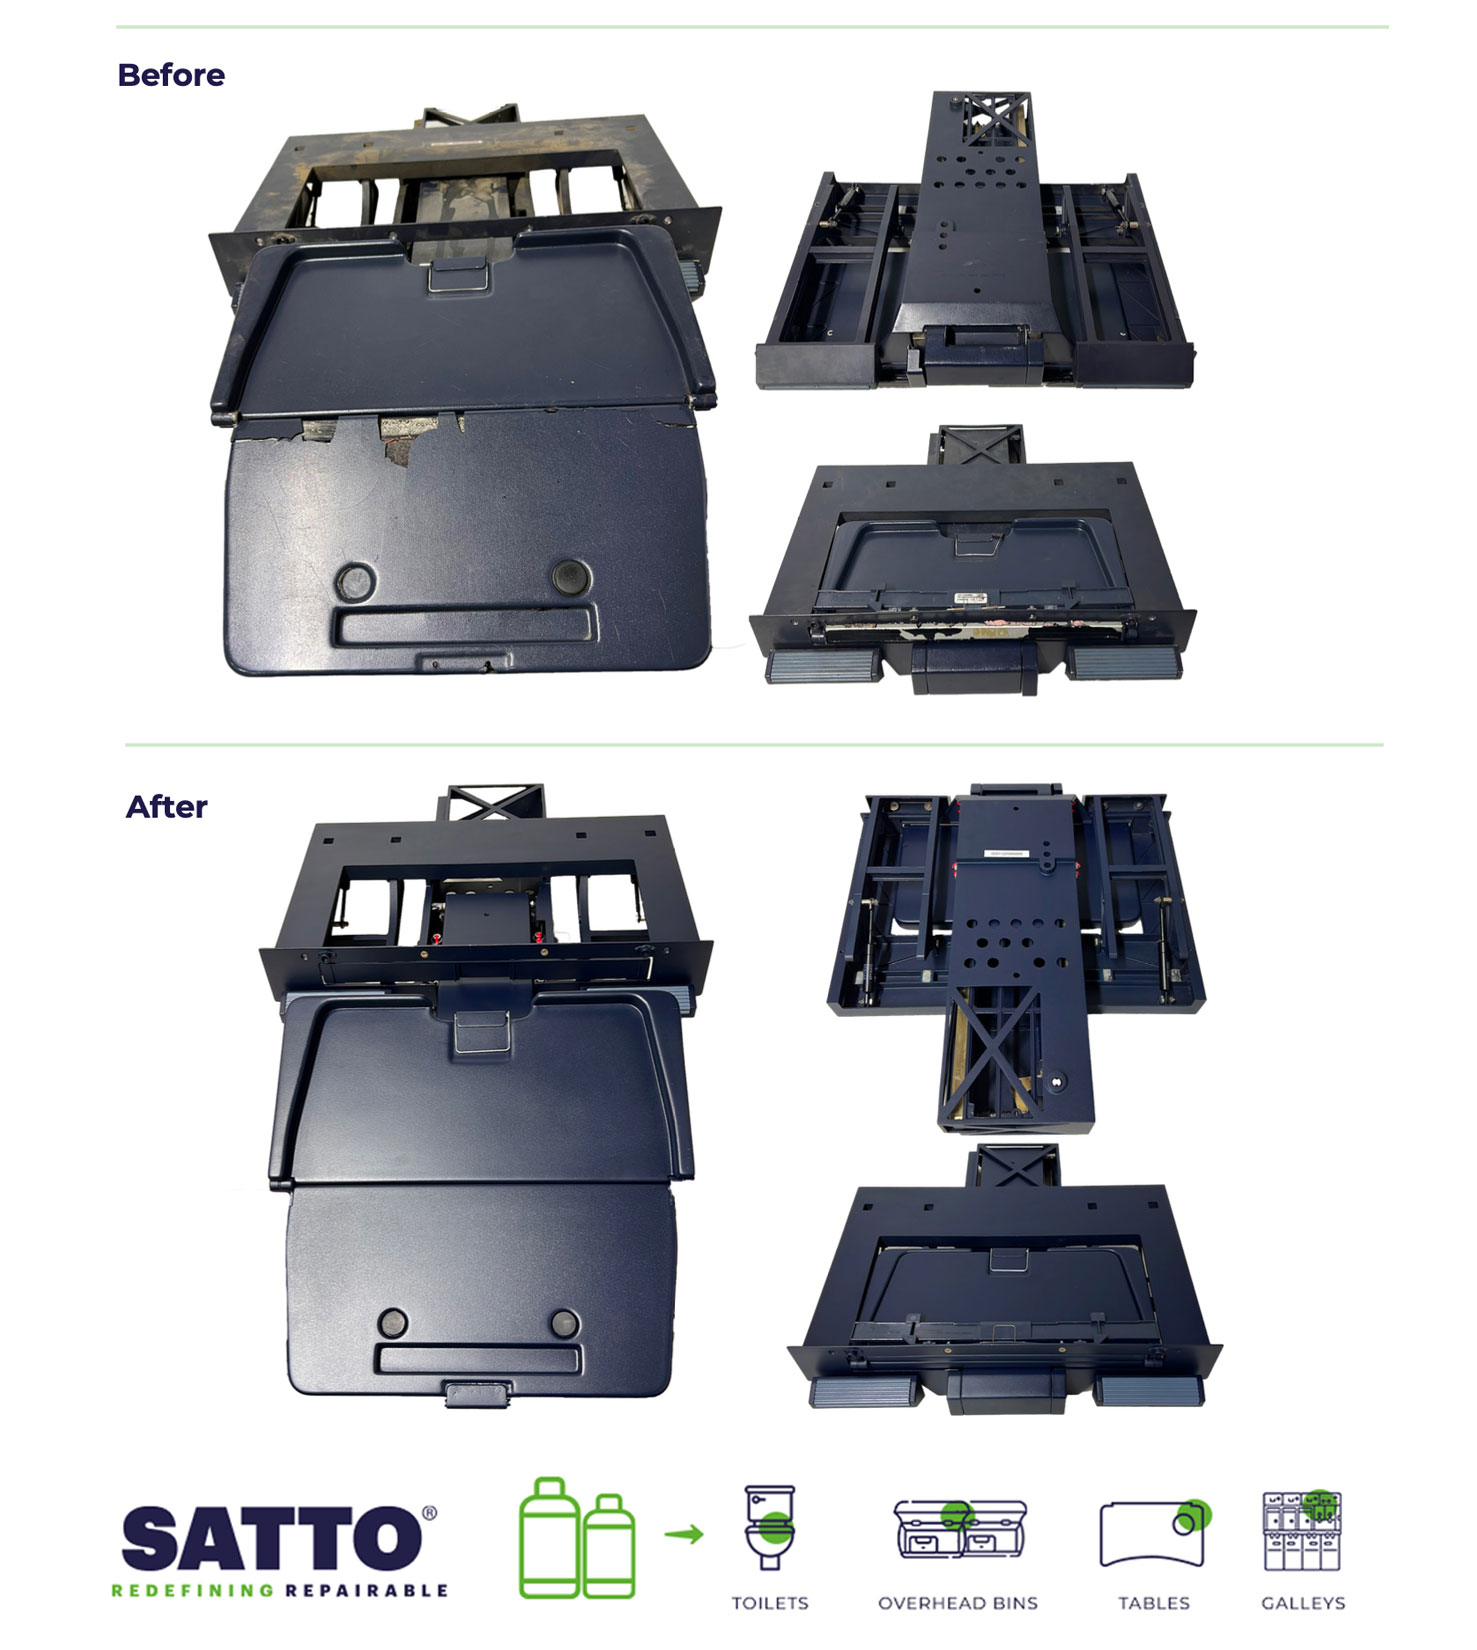 Before and after pilot assy by Cabinair Services and Satto plastics repair